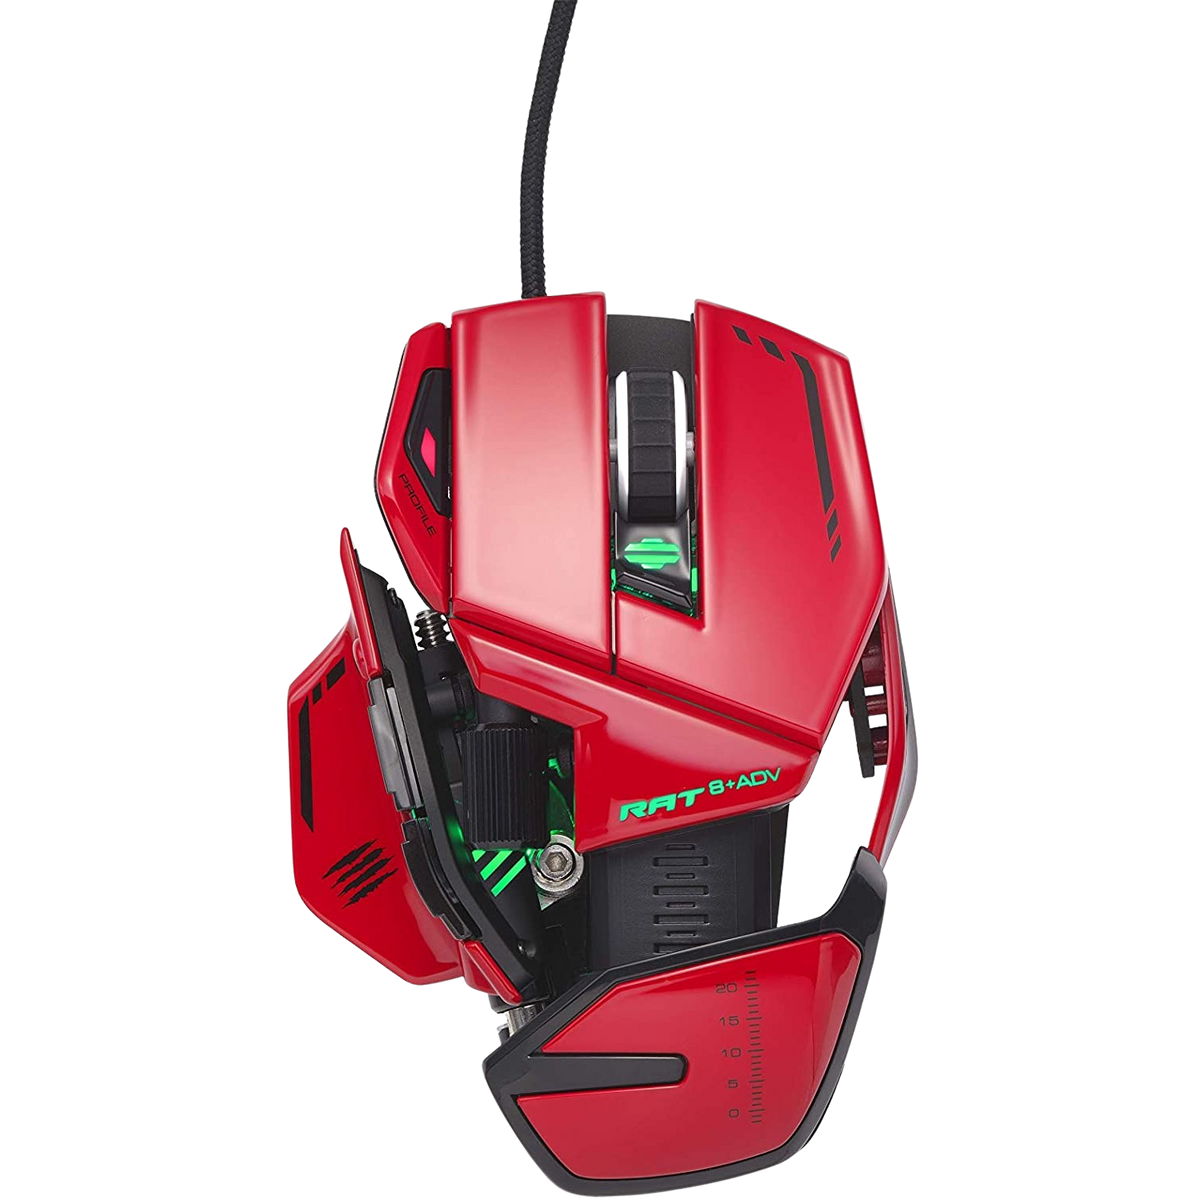 Mouse, Optical Gaming CATZ Red 8+ Gaming R.A.T. ADV Rot MAD Mouse,